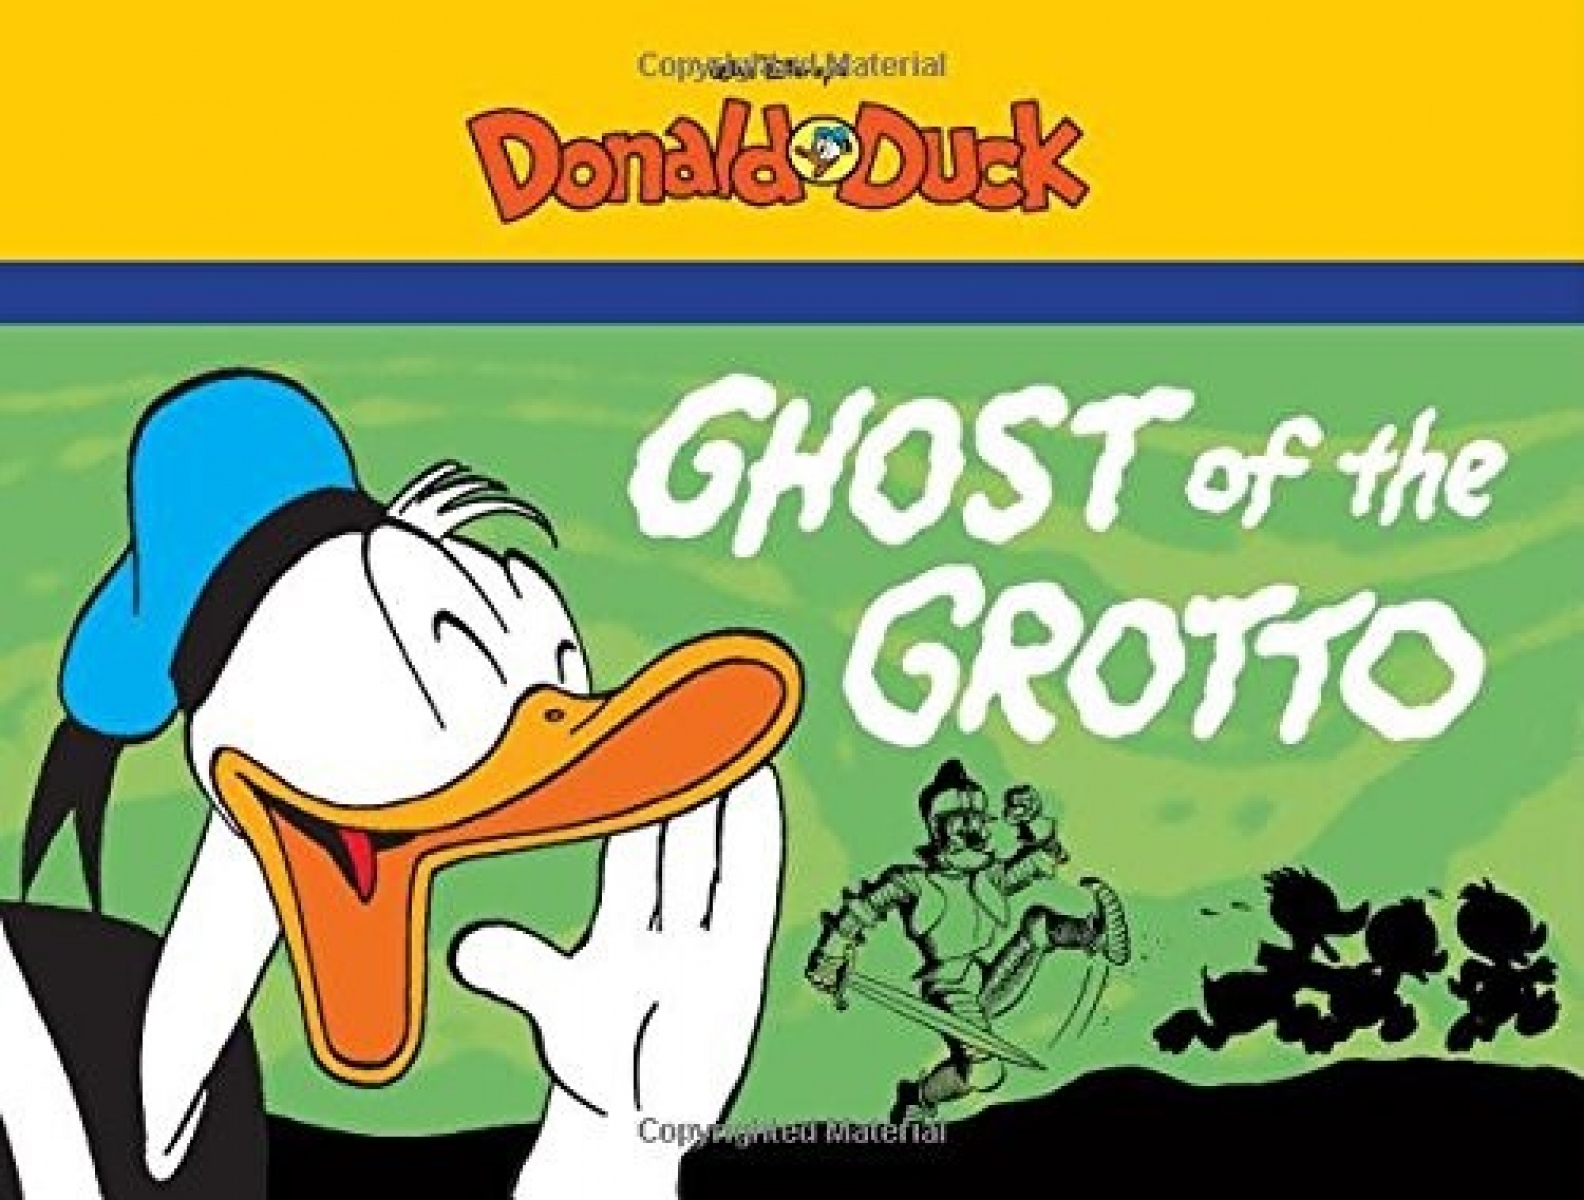 Barks Carl The Ghost of the Grotto: Starring Walt Disney's Donald Duck 